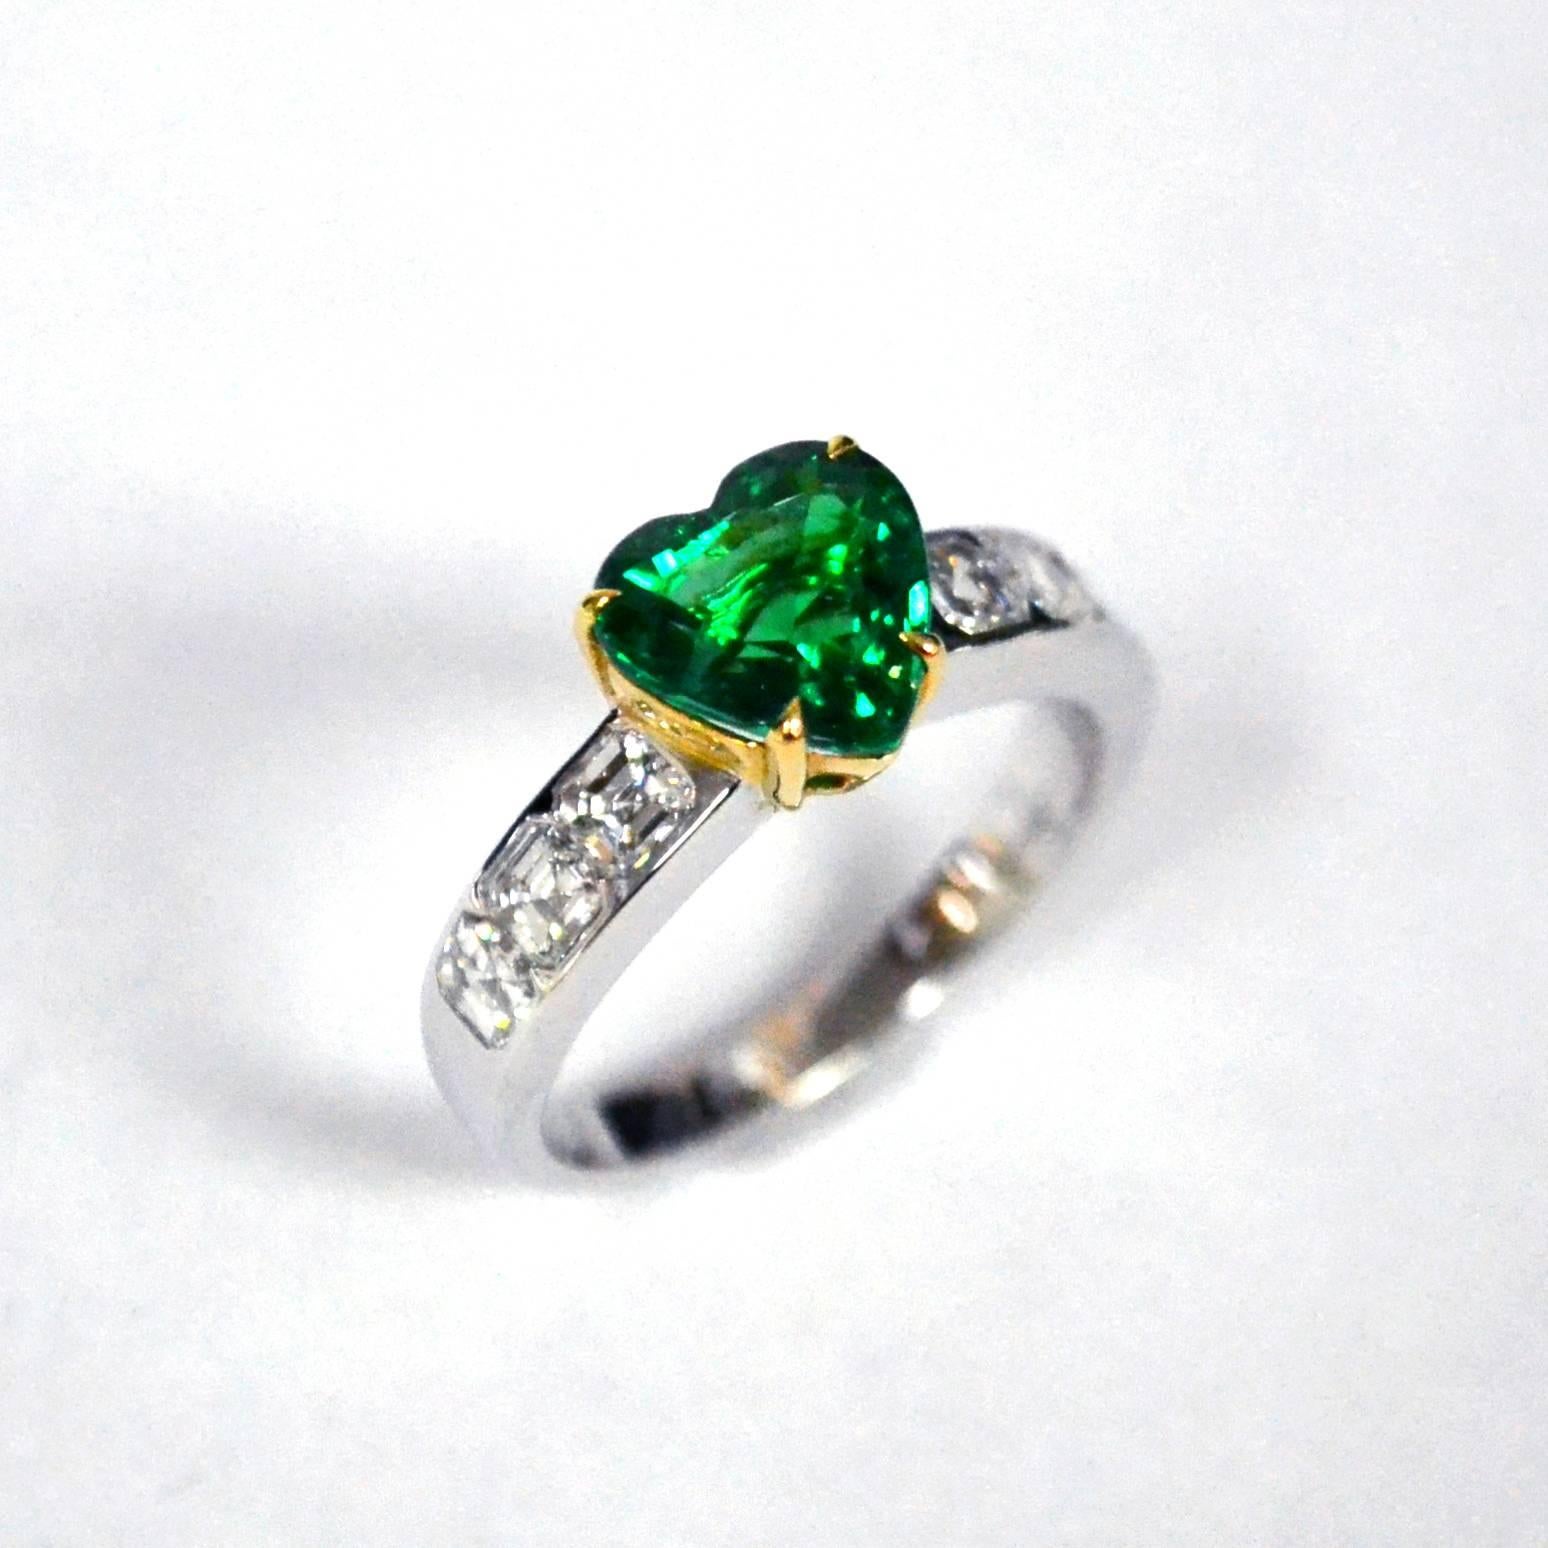 Ring in 18 karat two tone gold set with a heart shaped Zambian Emerald (1.96 carat) and 6 asscher cut Diamonds (0.96 carats).

Includes Gemstone Report by C.Dunaigre, Switzerland. 
Ring US Size 6.5
*Complimentary resizing service*